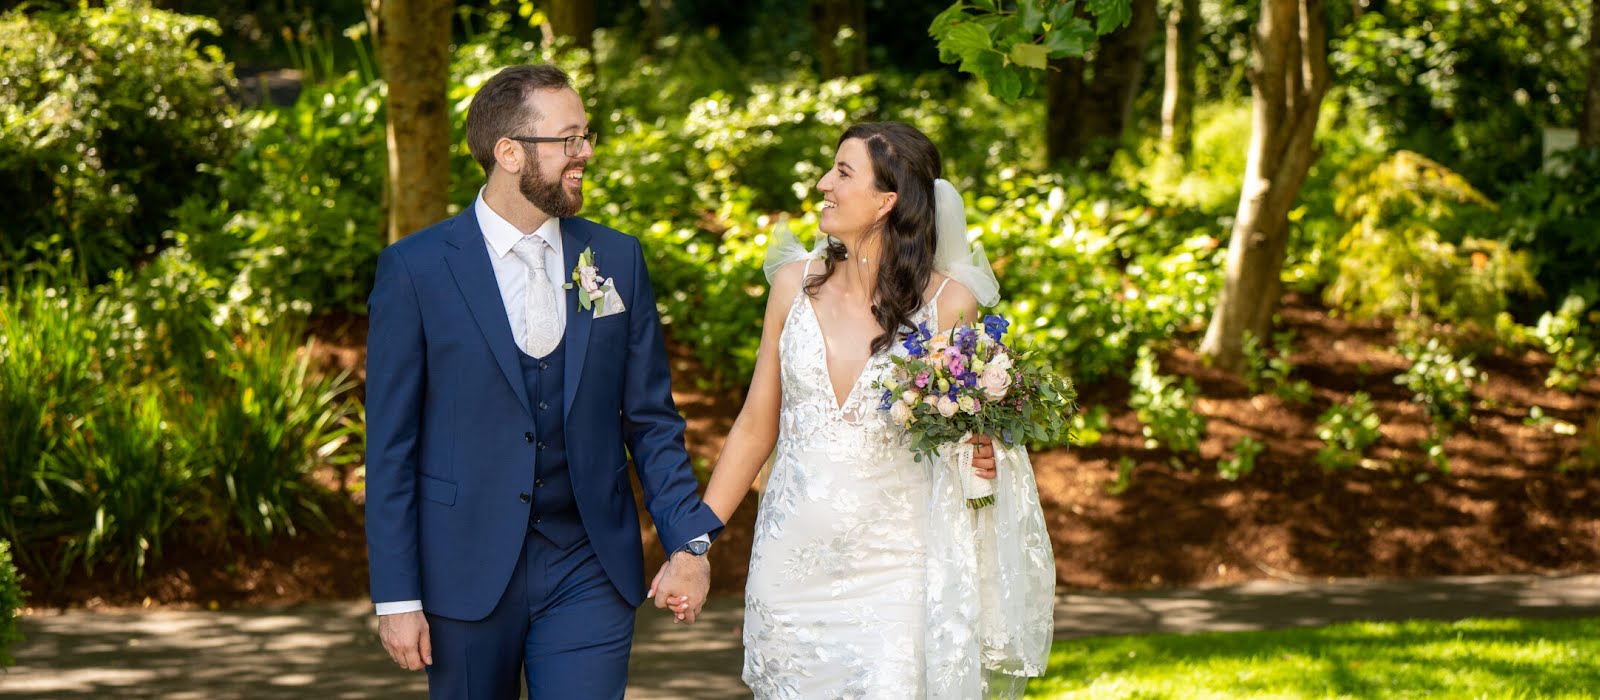 Real Weddings: Maria and Ado say ‘I do’ in Galway Bay Hotel